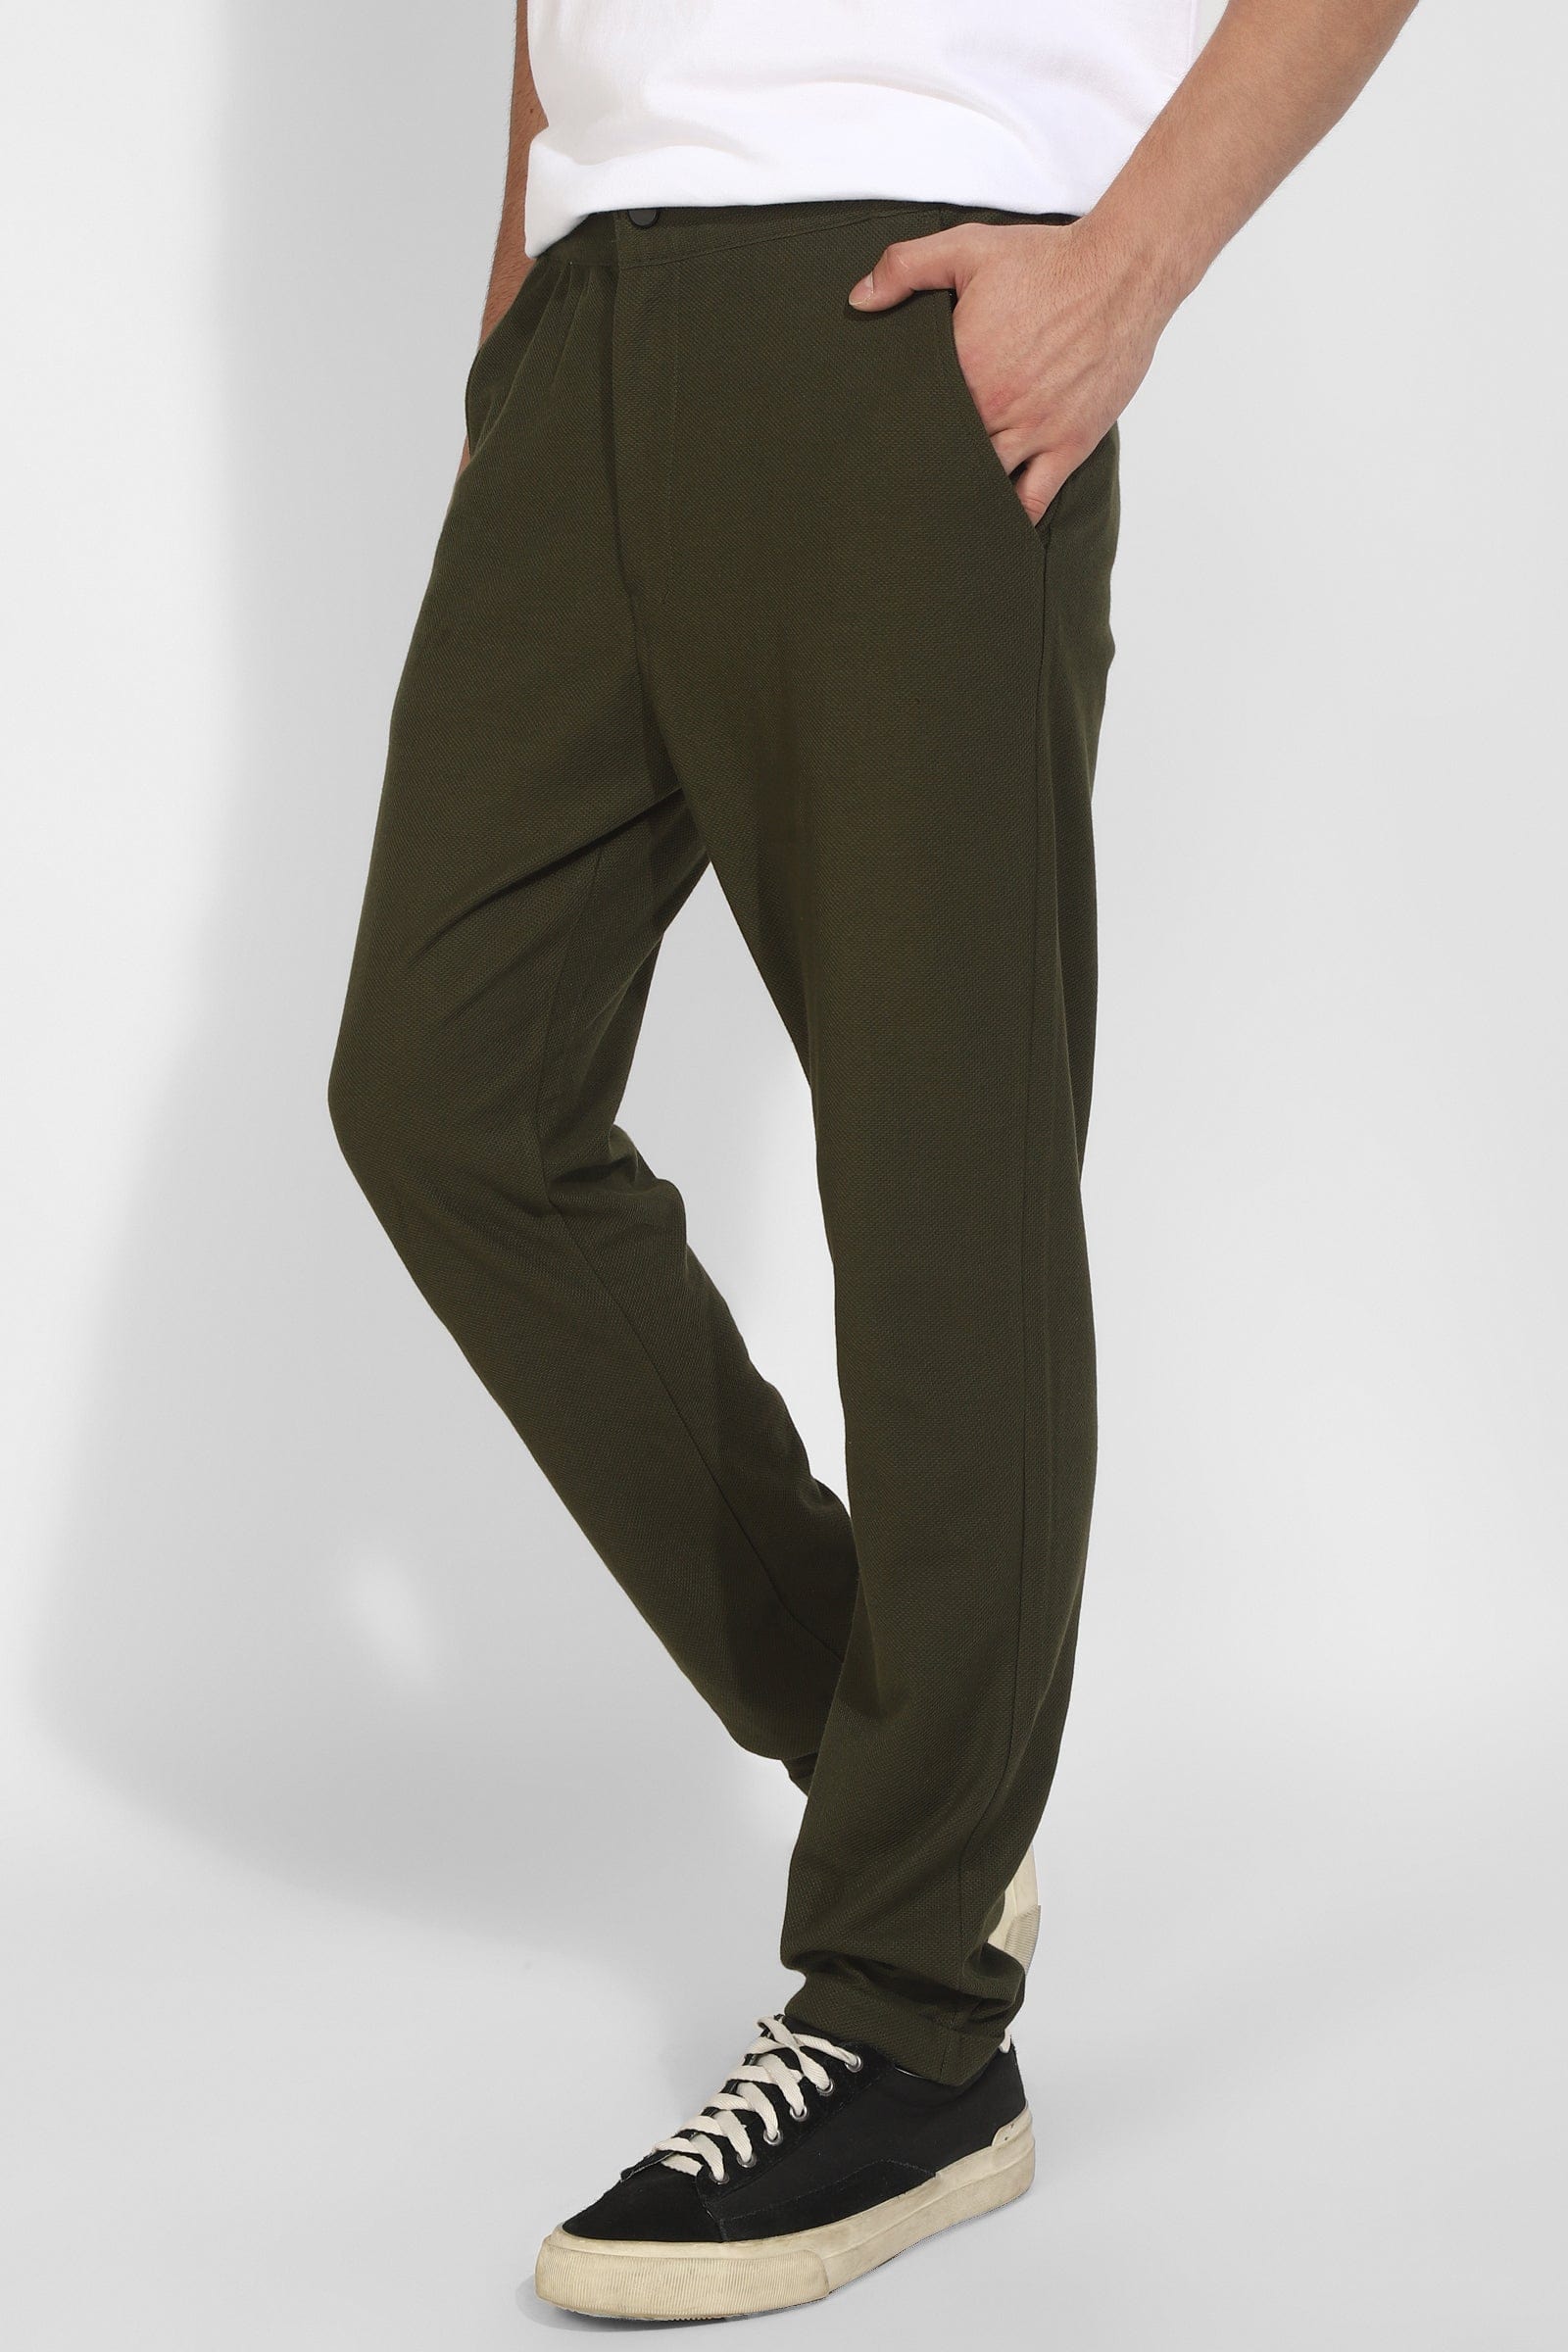 Dark Olive Knitted Trousers By Purple Mango